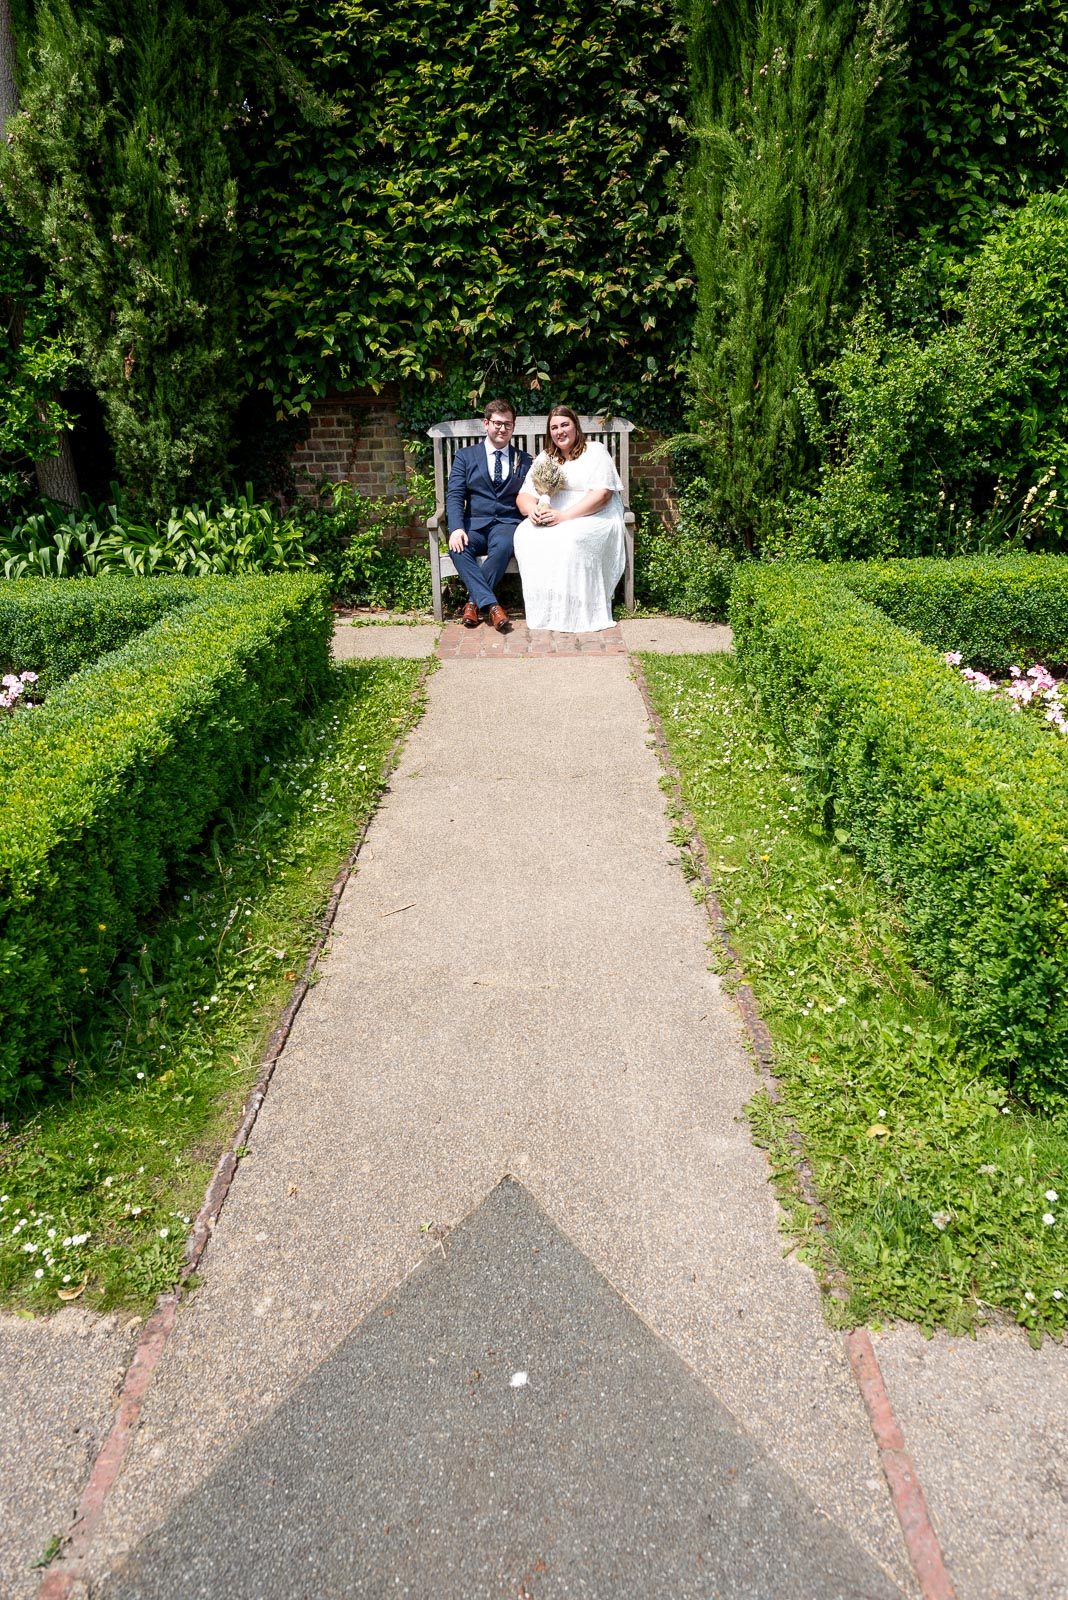 Sophie and Nathan pose on one of the benches in the secret garden in Southover Grange after their wedding in Lewes Register Office.